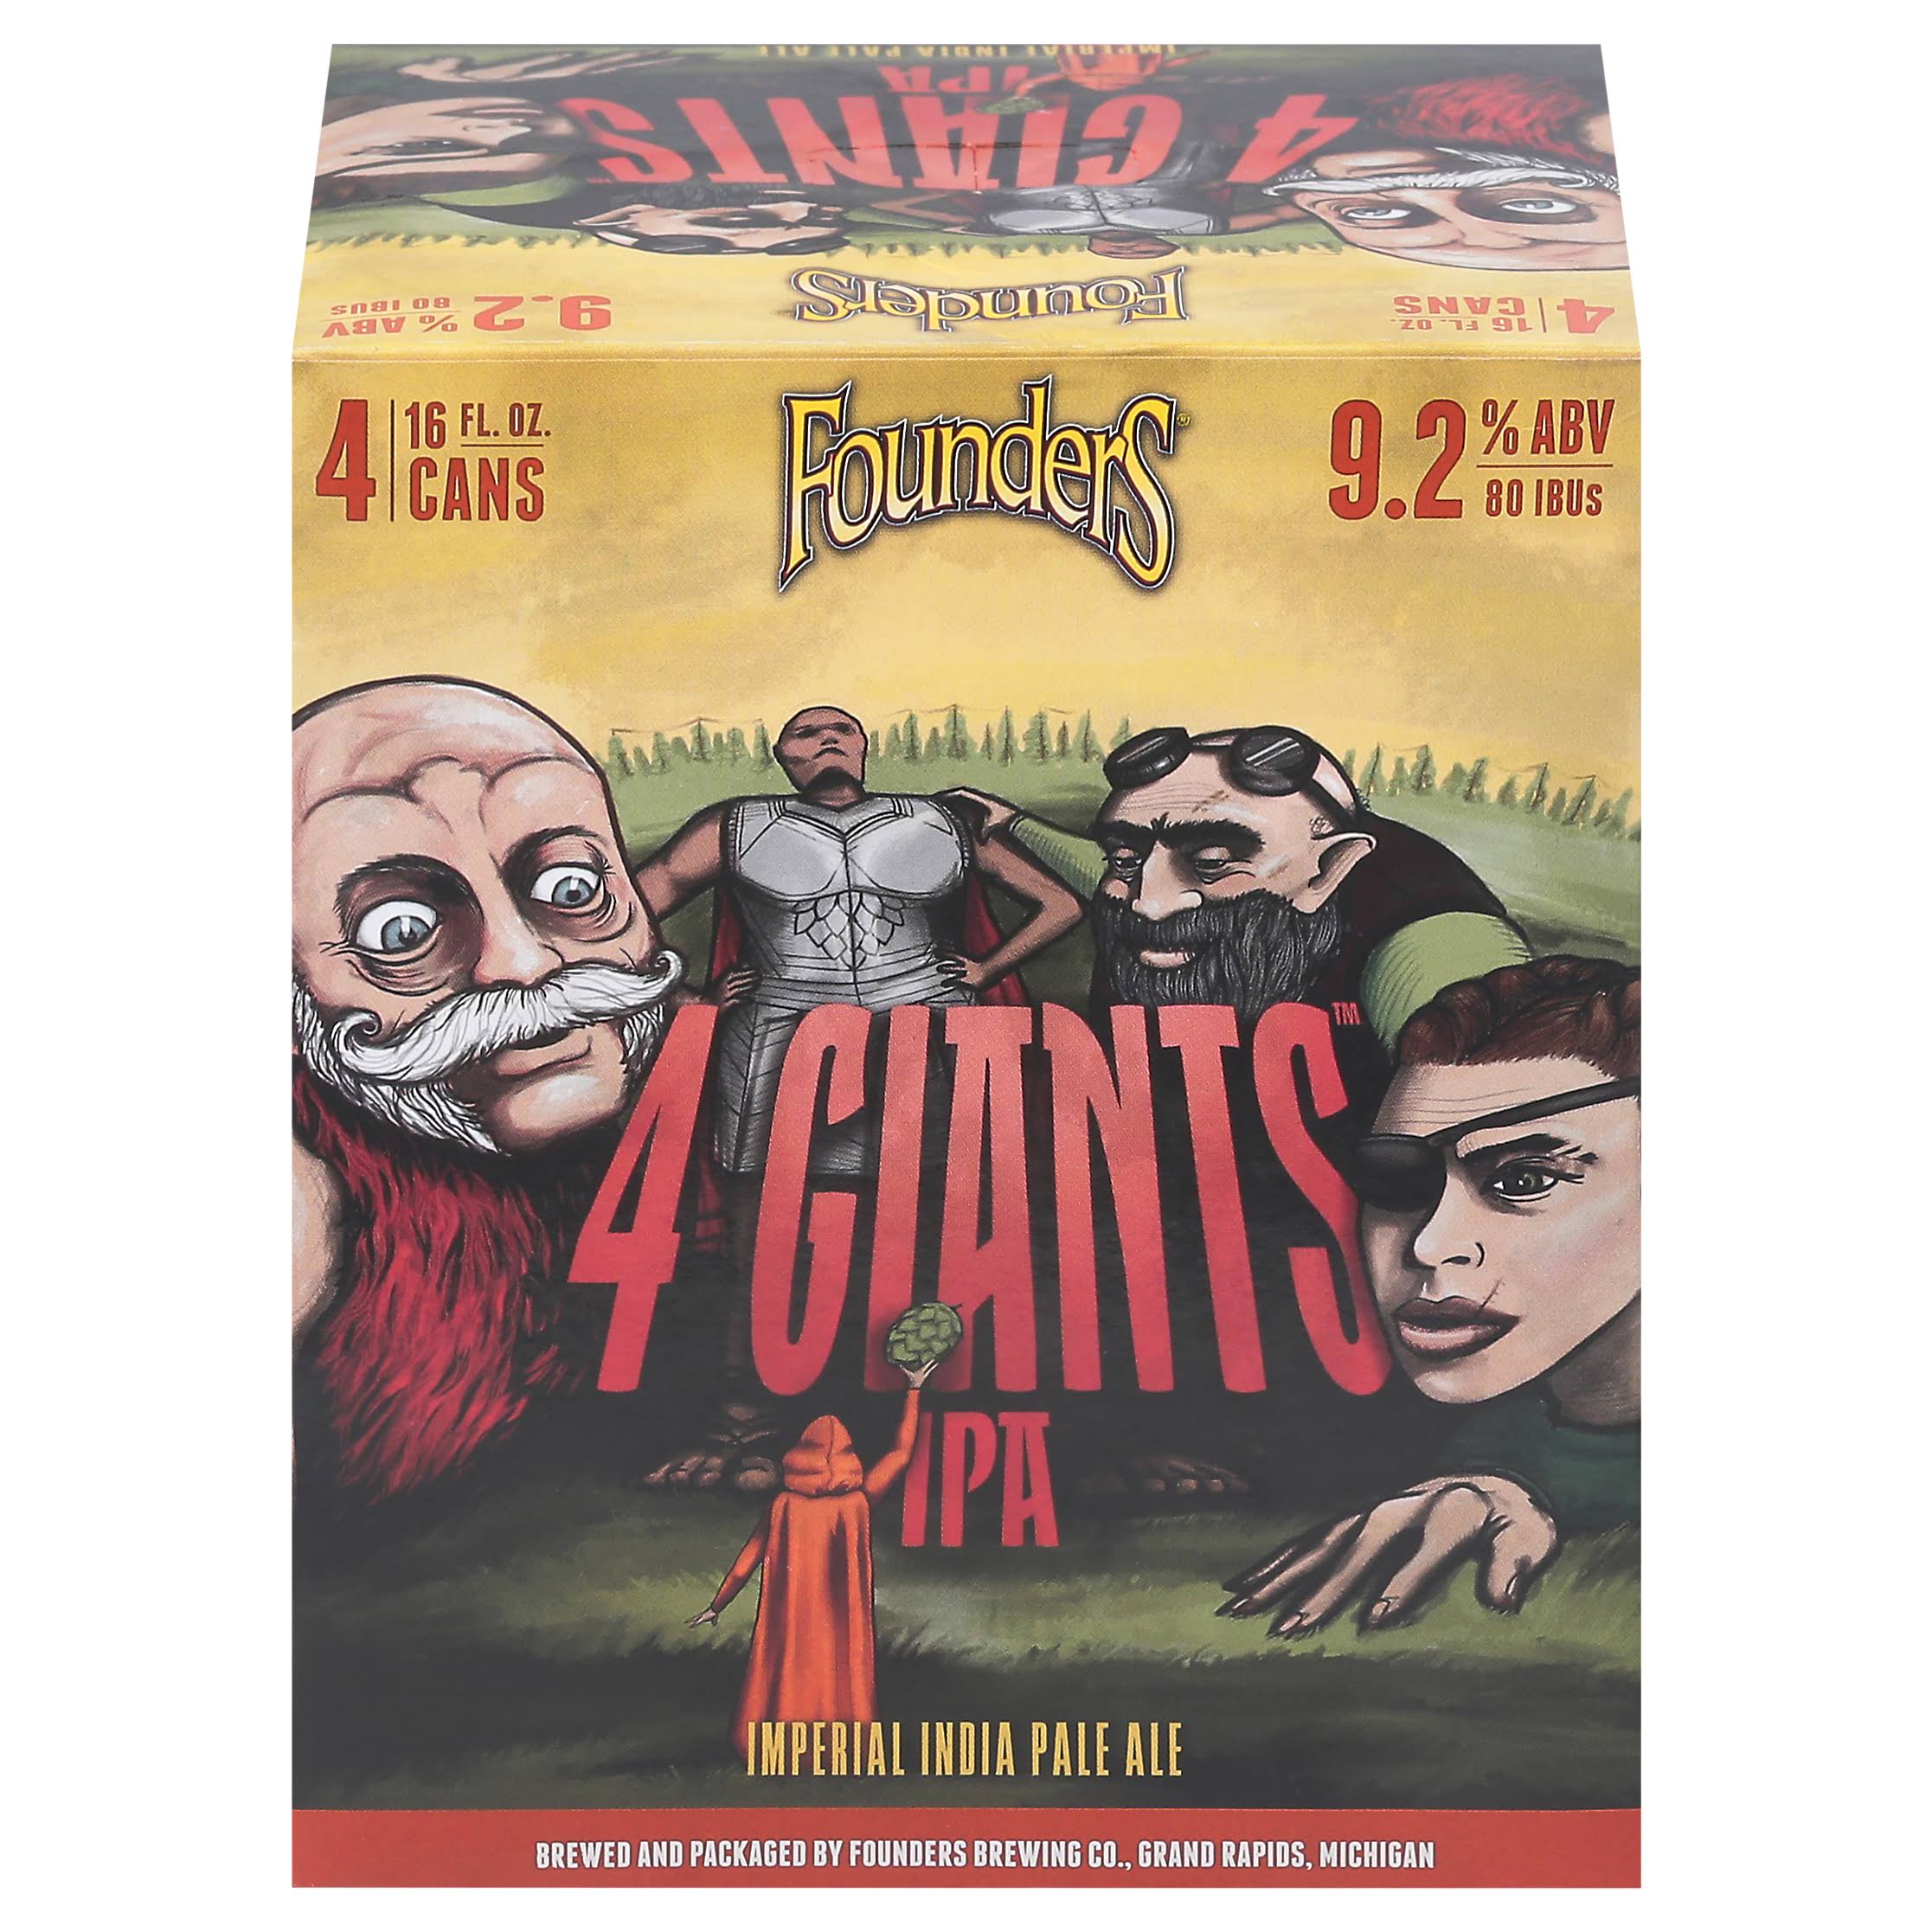 Founders Beer, 4 Giants IPA - 4 pack, 16 fl oz cans